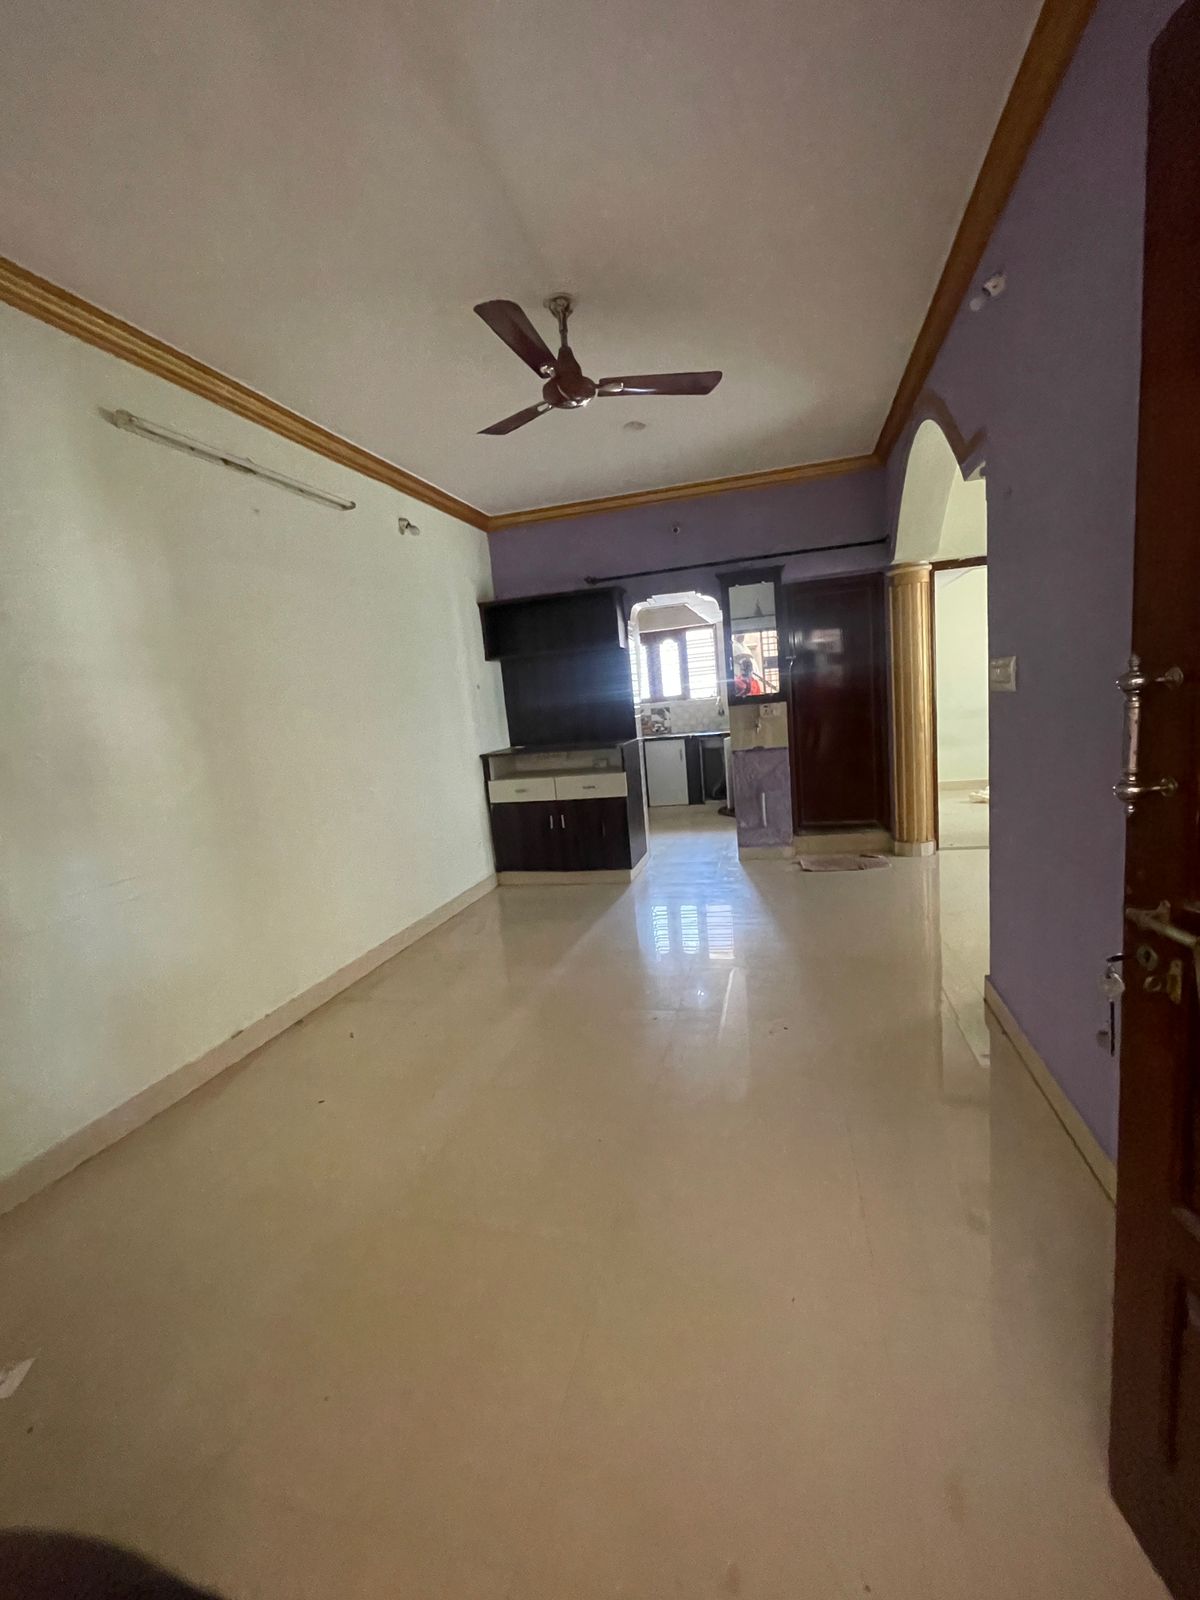 2 BHK Residential Apartment for Lease Only at JAML2 - 3652 - 29 Lakhs in Vajarahalli